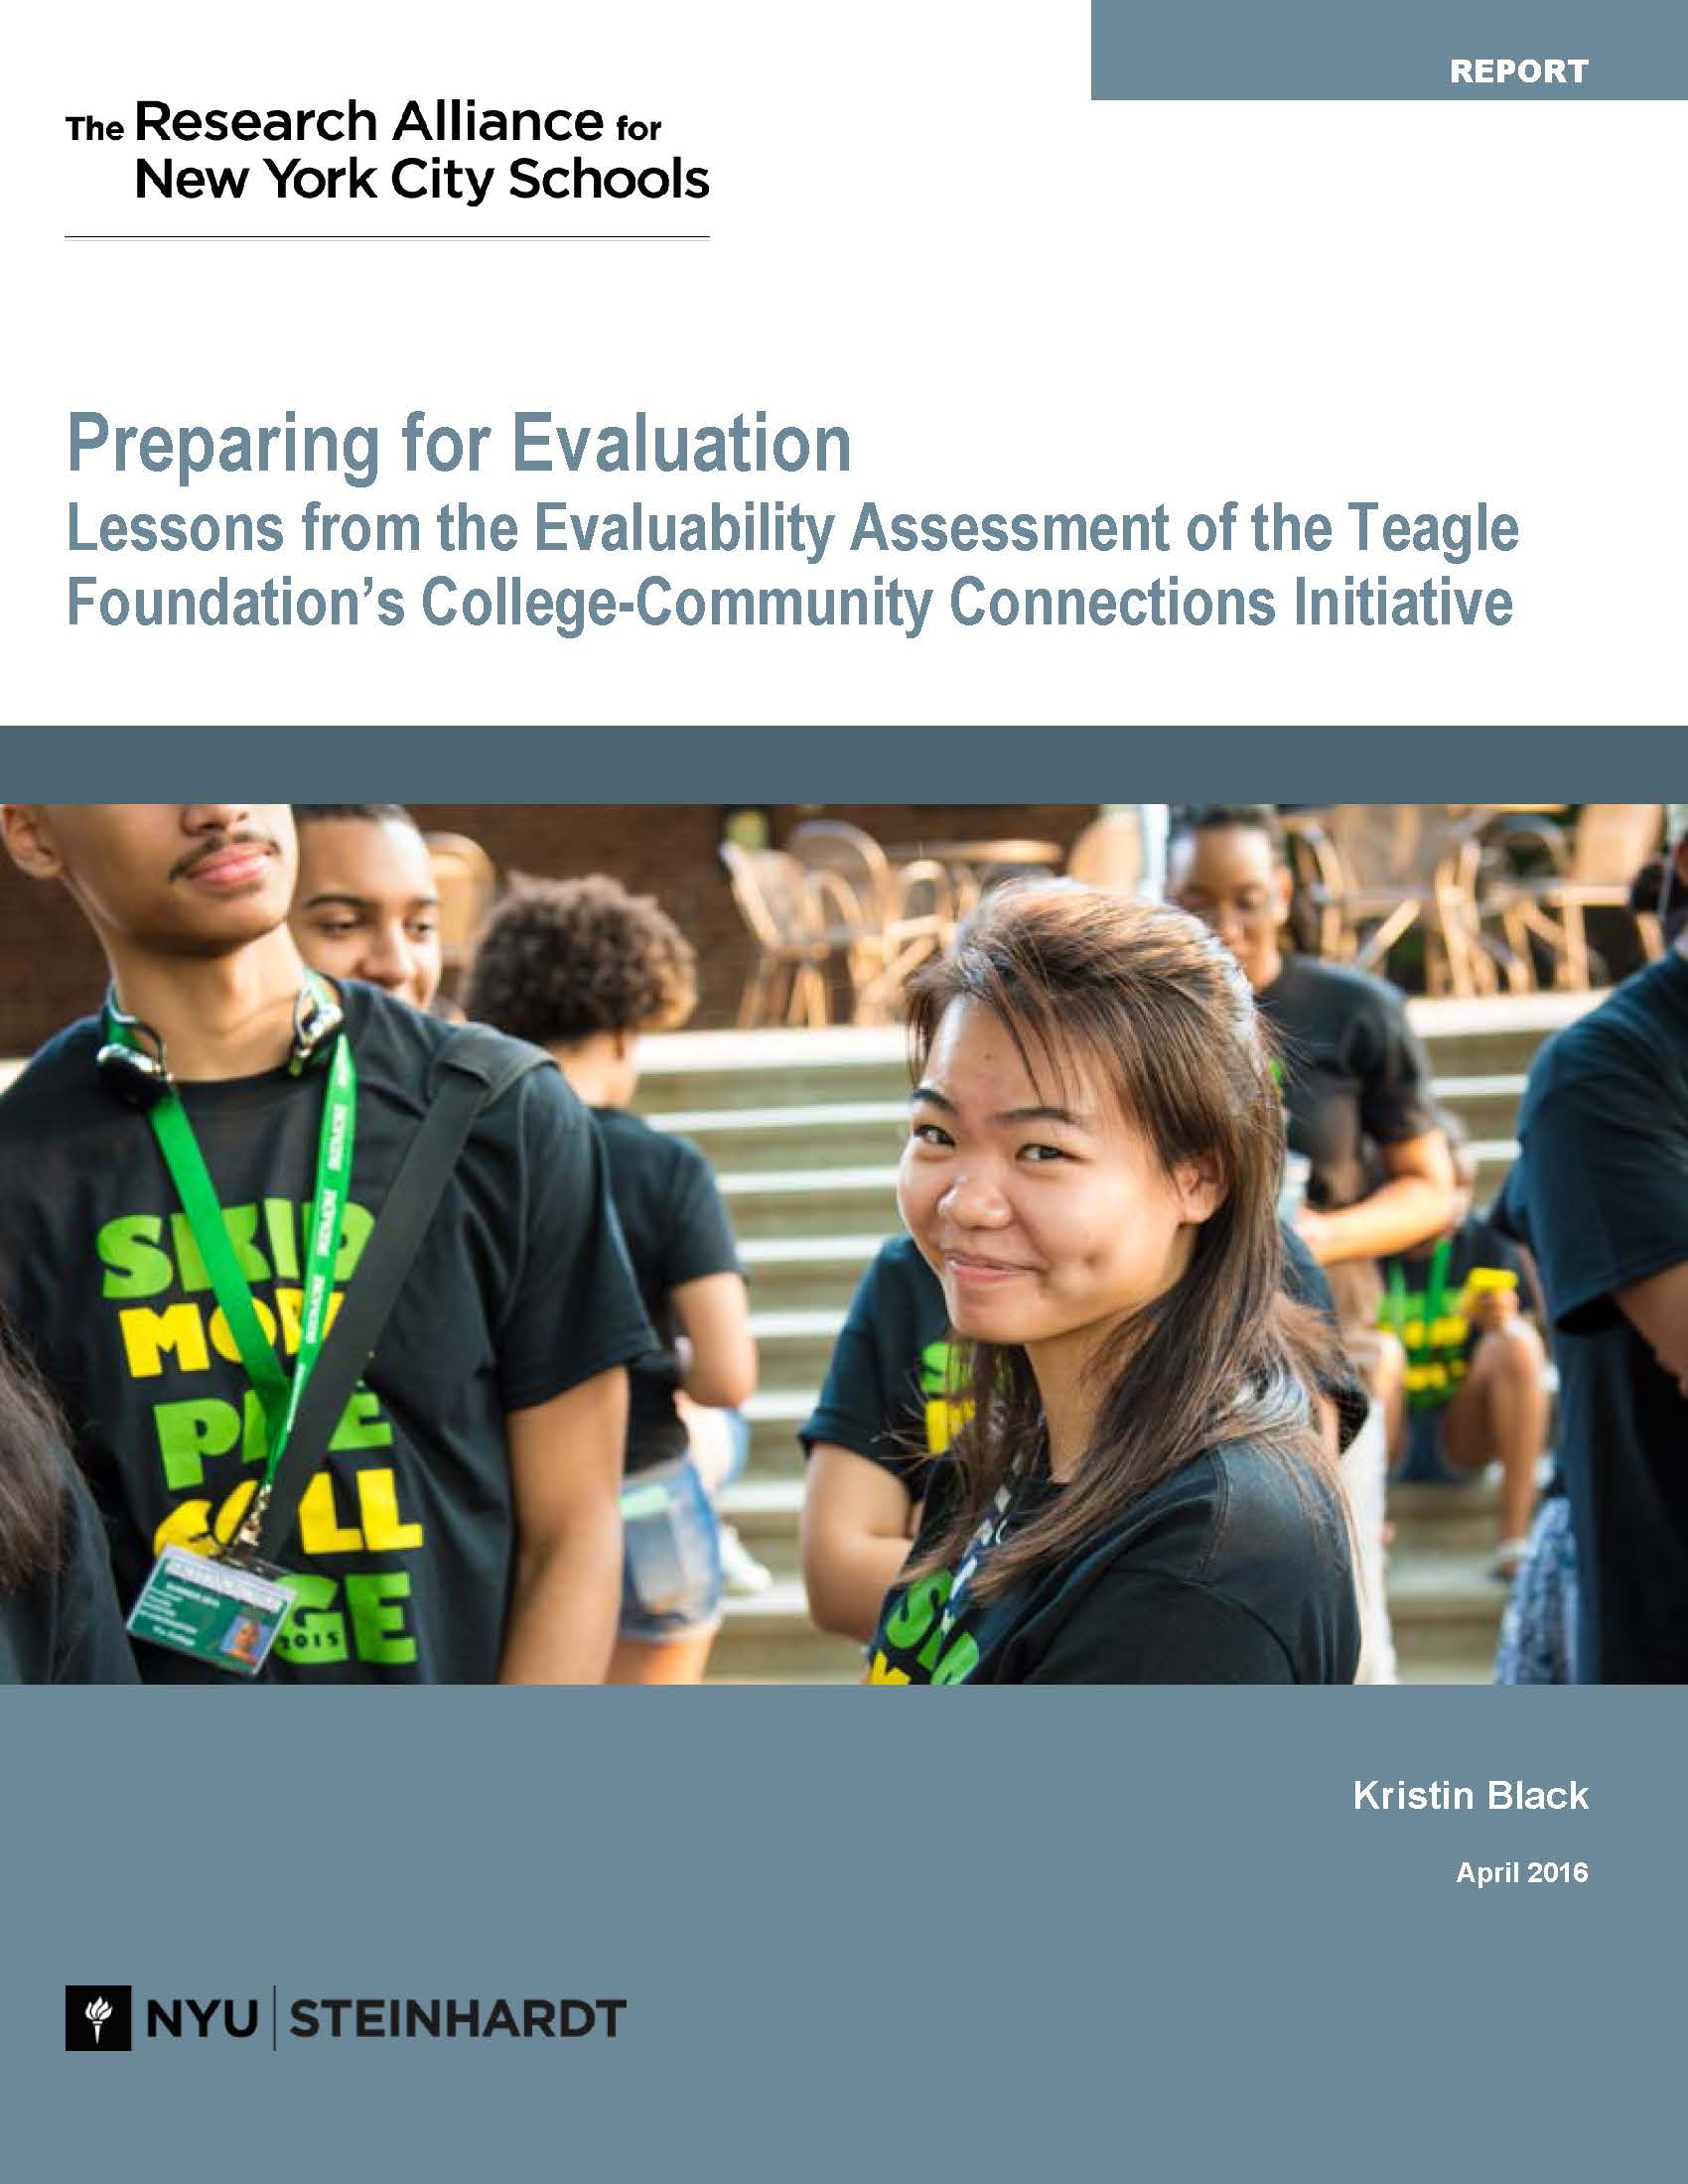 Preparing for Evaluation: Lessons from a Review of the College-Community Connections Initiative